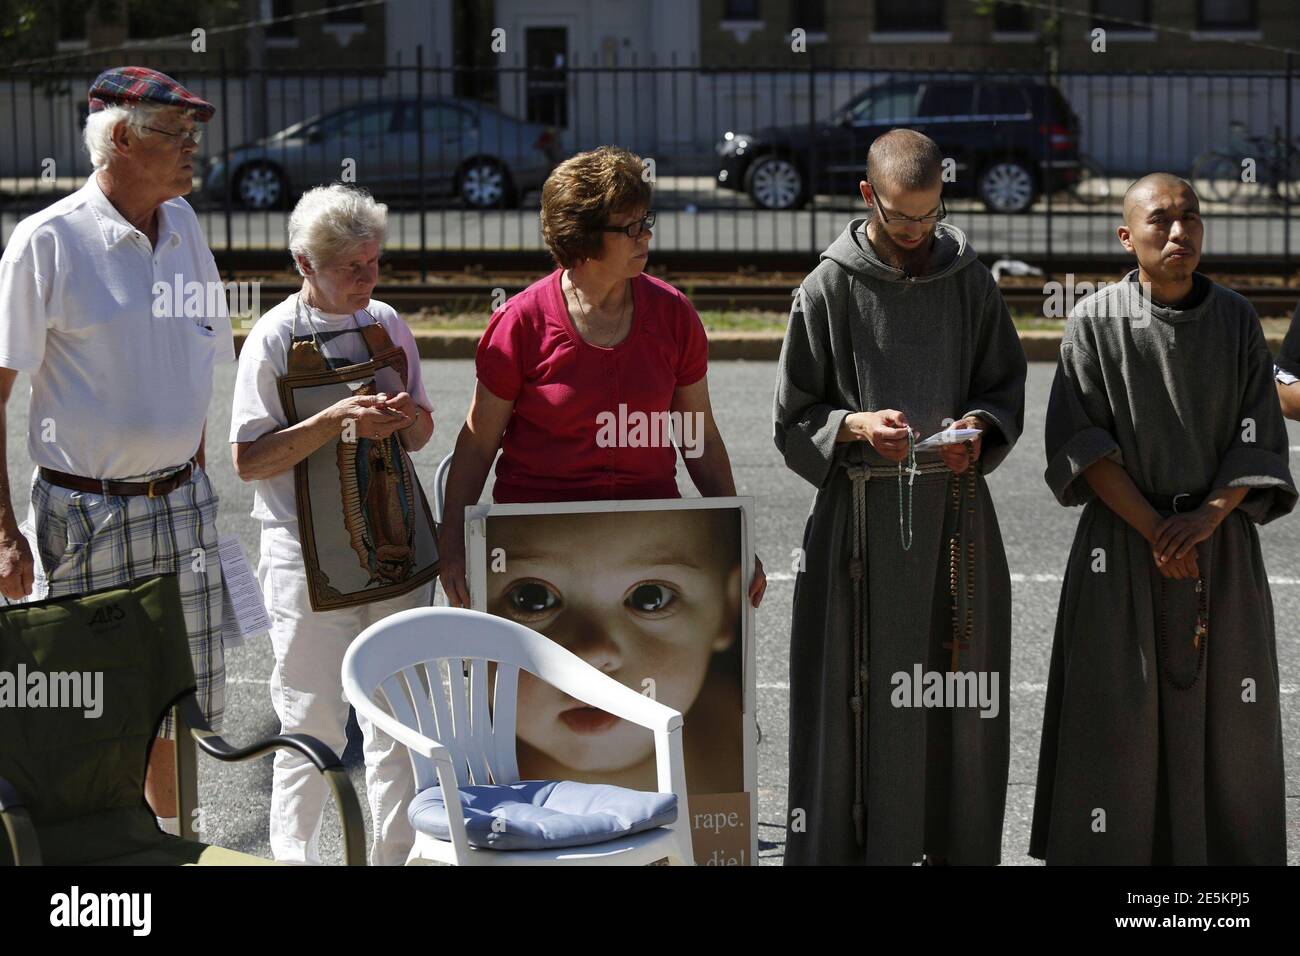 Abortion protesters stand in front of a Planned Parenthood clinic in Boston, Massachusetts, June 28, 2014. Massachusetts is beefing up security around abortion clinics and scrambling for a legal fix after the U.S. Supreme Court voided the state's buffer zone law that kept protesters 35 feet away, saying it violated freedom of speech. REUTERS/Dominick Reuter  (UNITED STATES - Tags: CRIME LAW POLITICS HEALTH RELIGION) Stock Photo